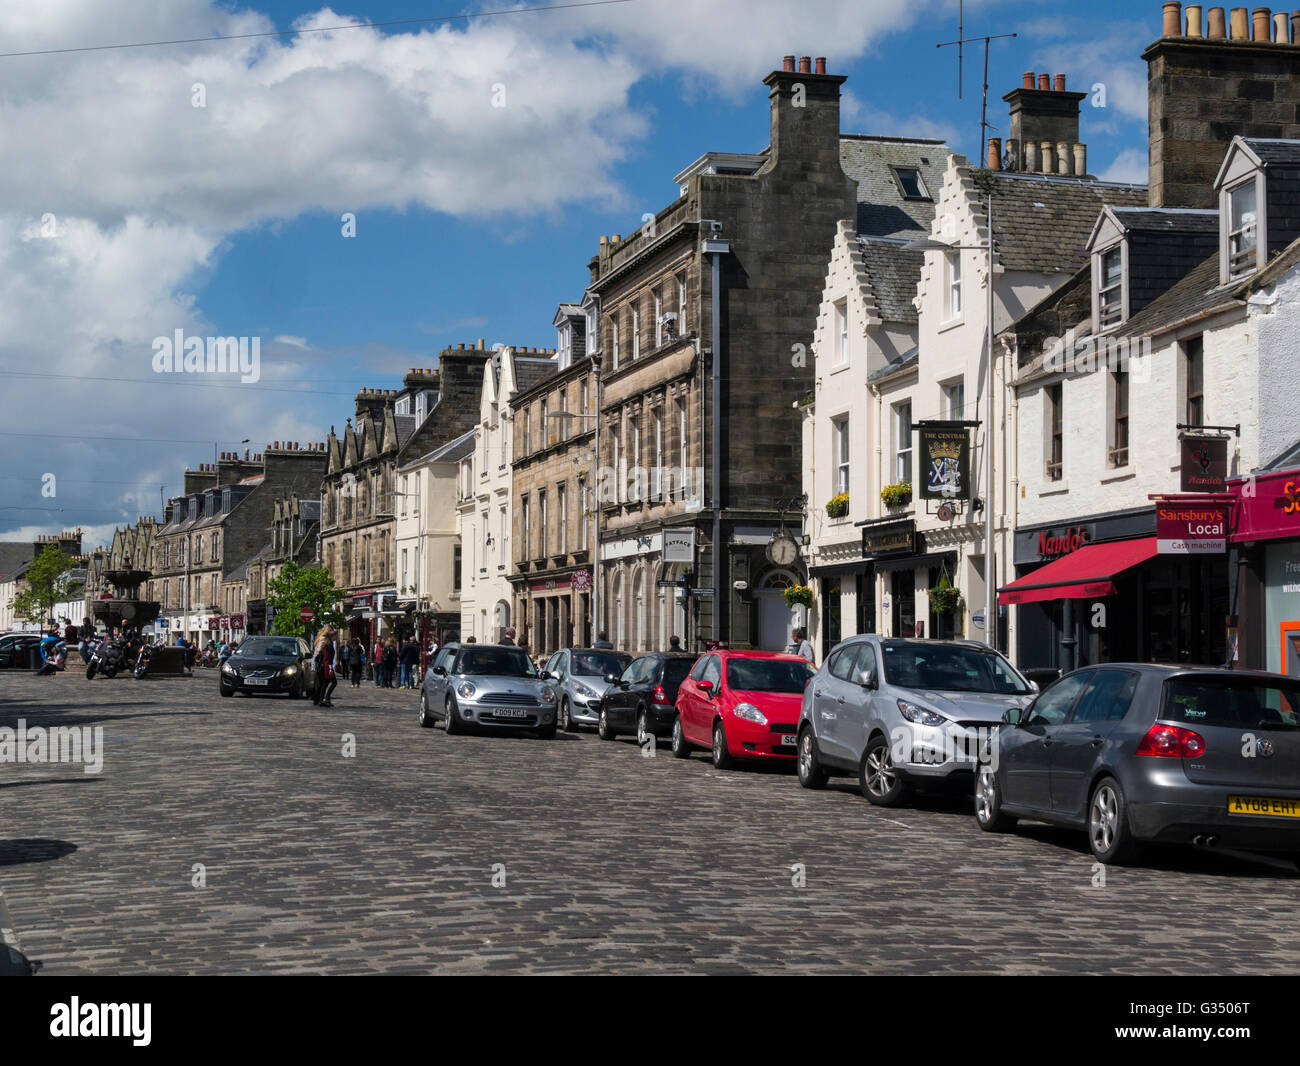 View along Market Street historic Royal Burgh St Andrews Fife Scotland cobbled street flanked by shops cafes restaurants pubs in historic buildings Stock Photo